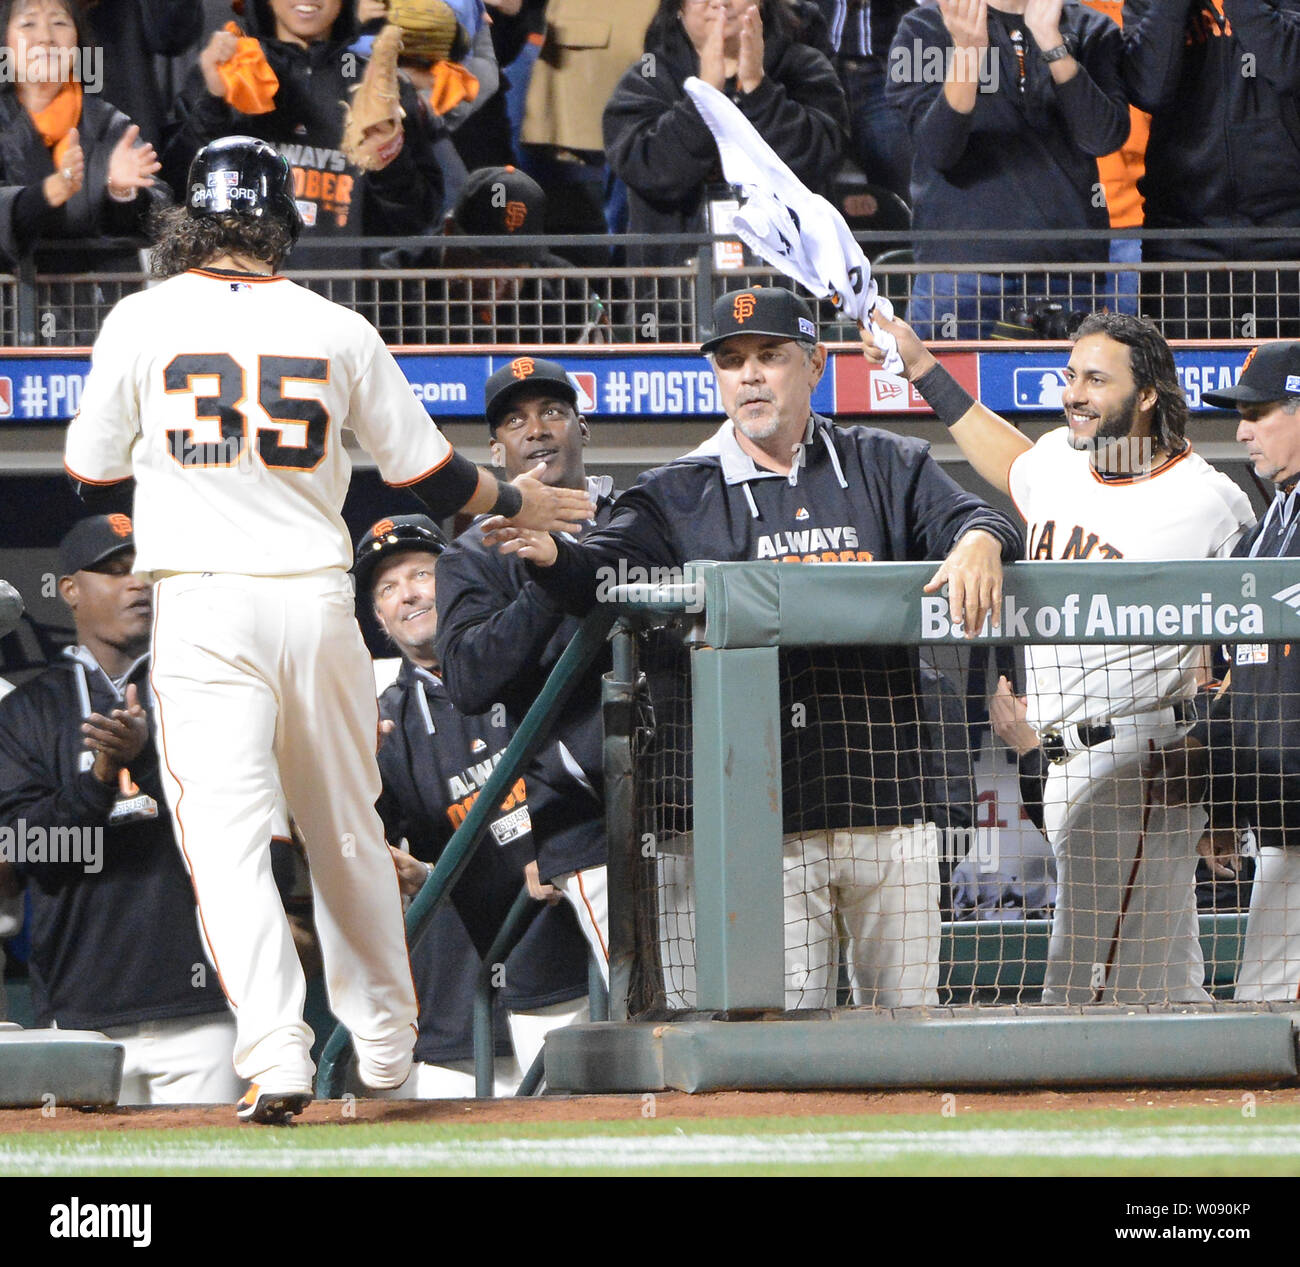 San Francisco Giants Brandon Crawford (35) is greeted by manager Bruce Bochey as Hunter Pence waves a towell at the dugout after he scored a run in the sixth inning against the St. Louis Cardinals in game 4 of the National League Championship Series at AT&T Park in San Francisco on October 15, 2014. The Giants defeated the Cardinals 6-4 and lead the best of 7 series 3-1.    UPI/Terry Schmitt Stock Photo